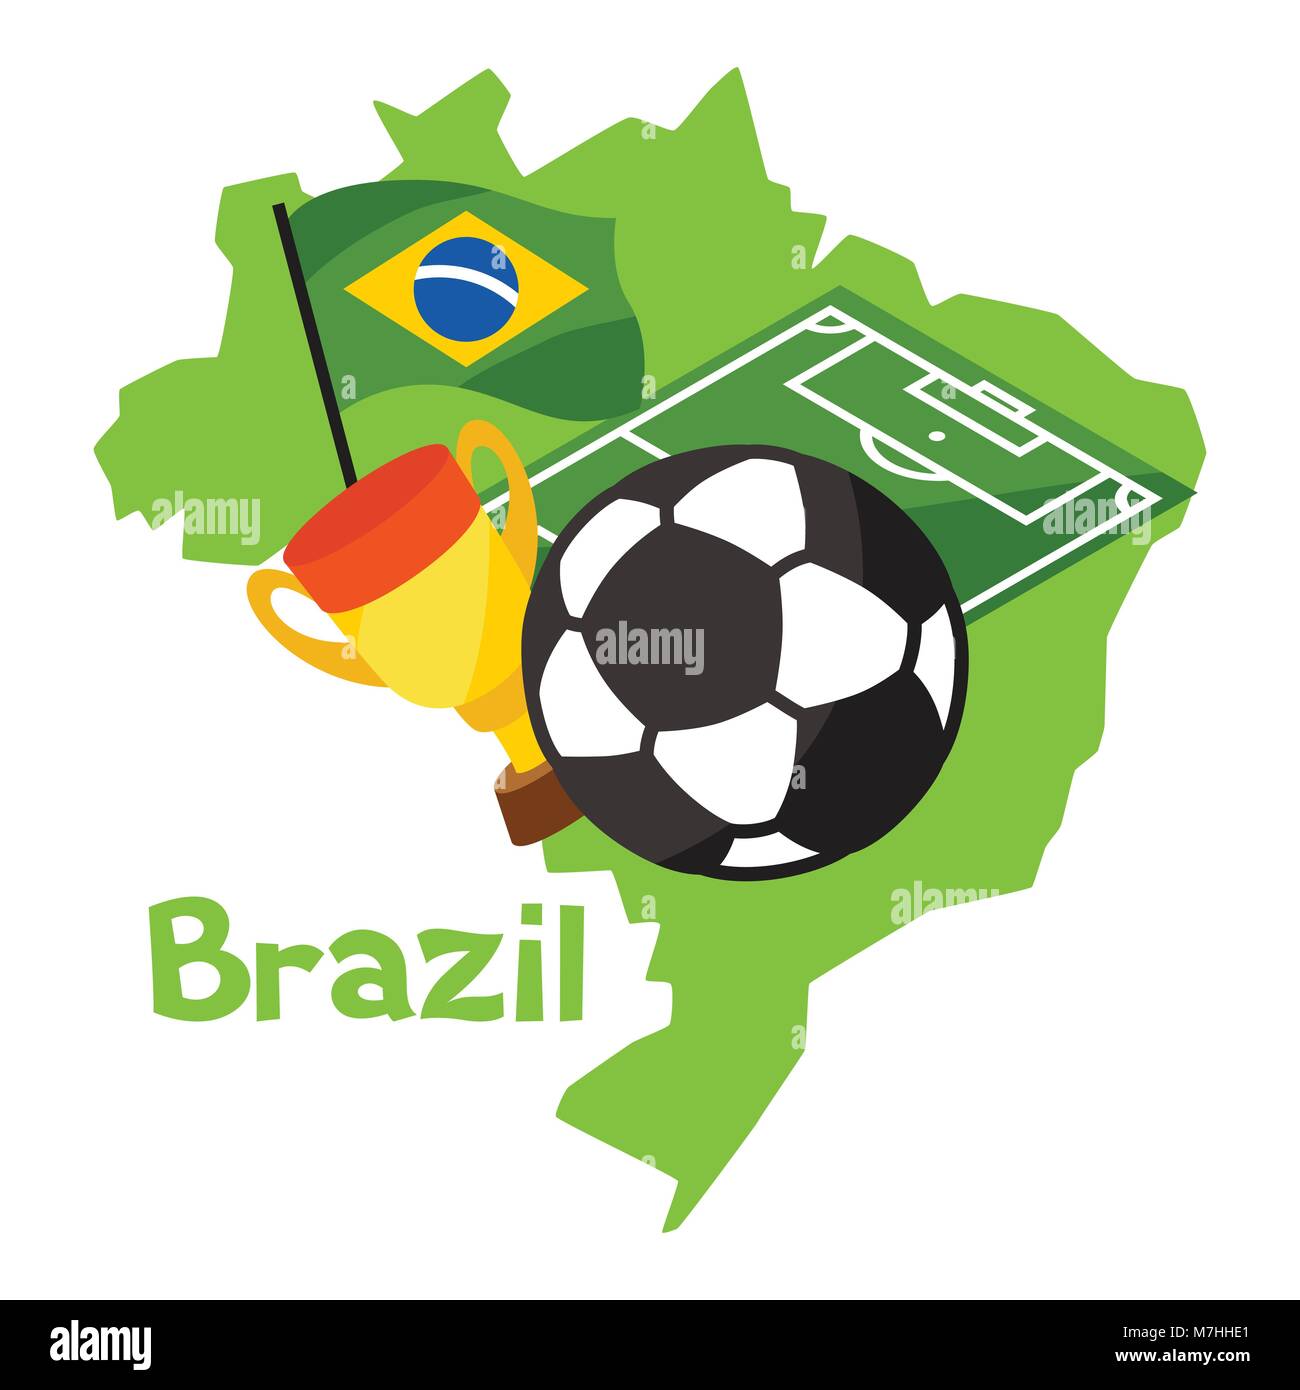 Stylized map of Brazil with soccer ball and flag Stock Vector